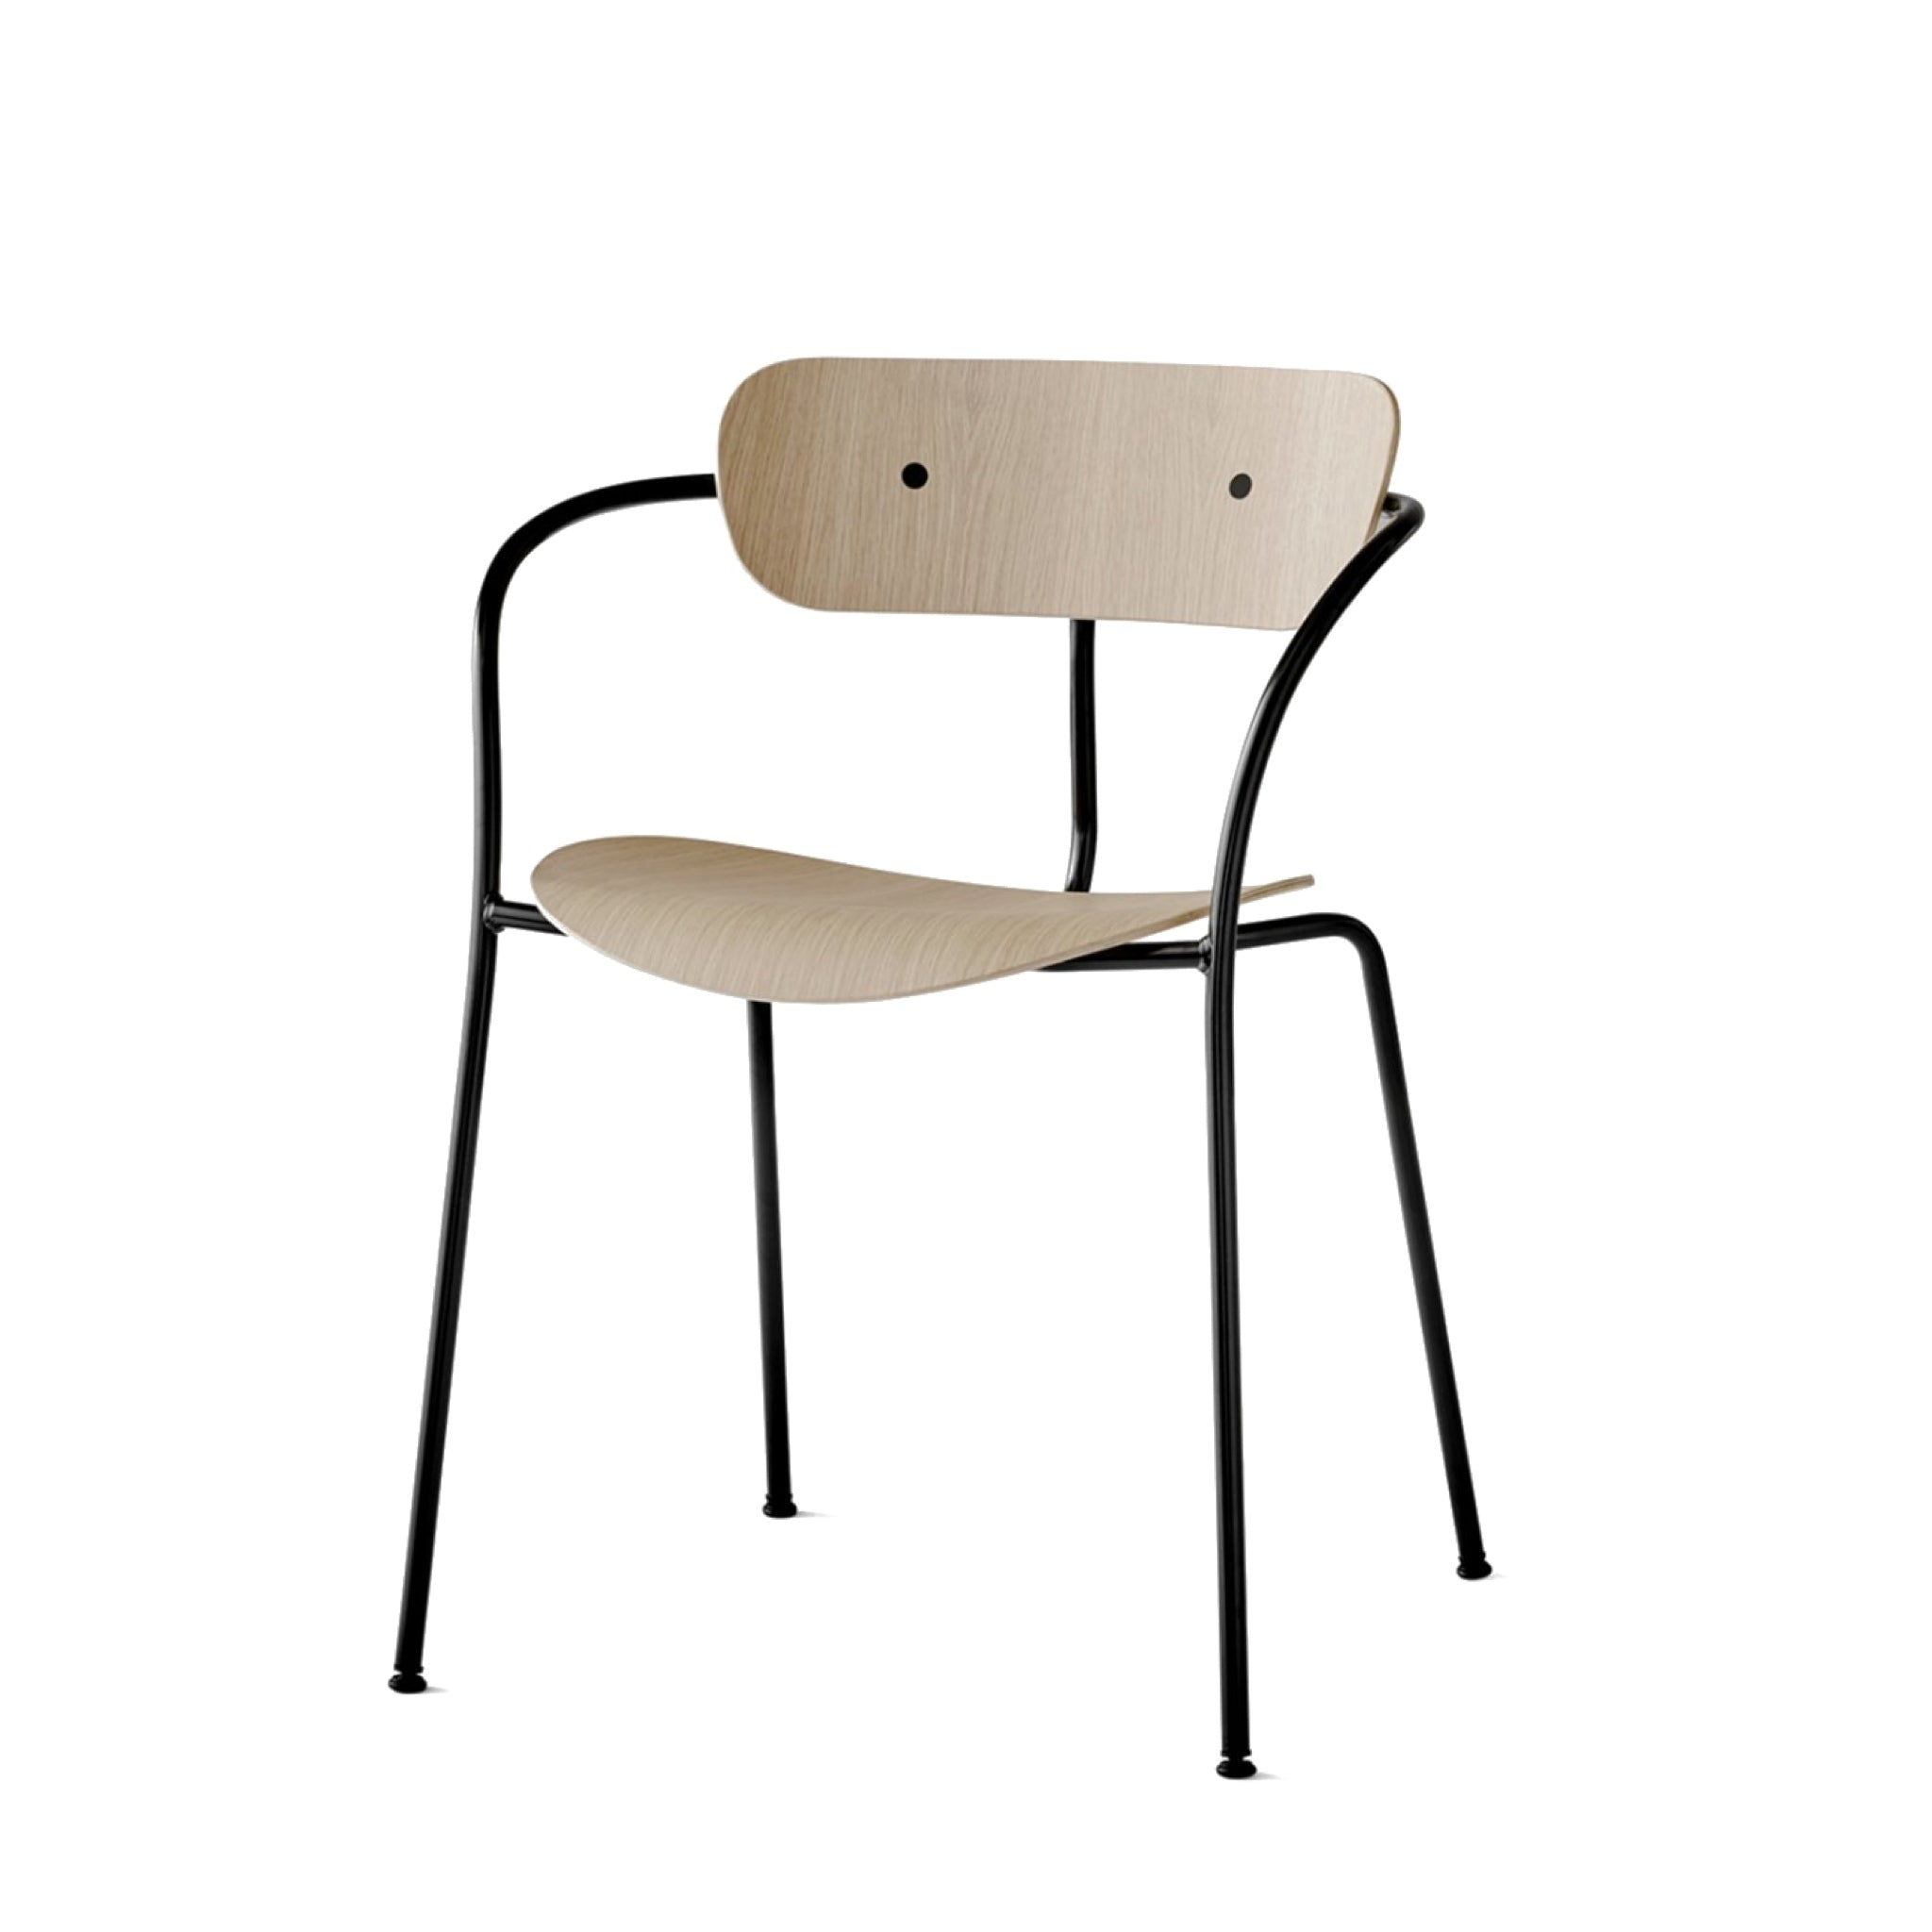 AV2 Pavilion Chair by Tradition